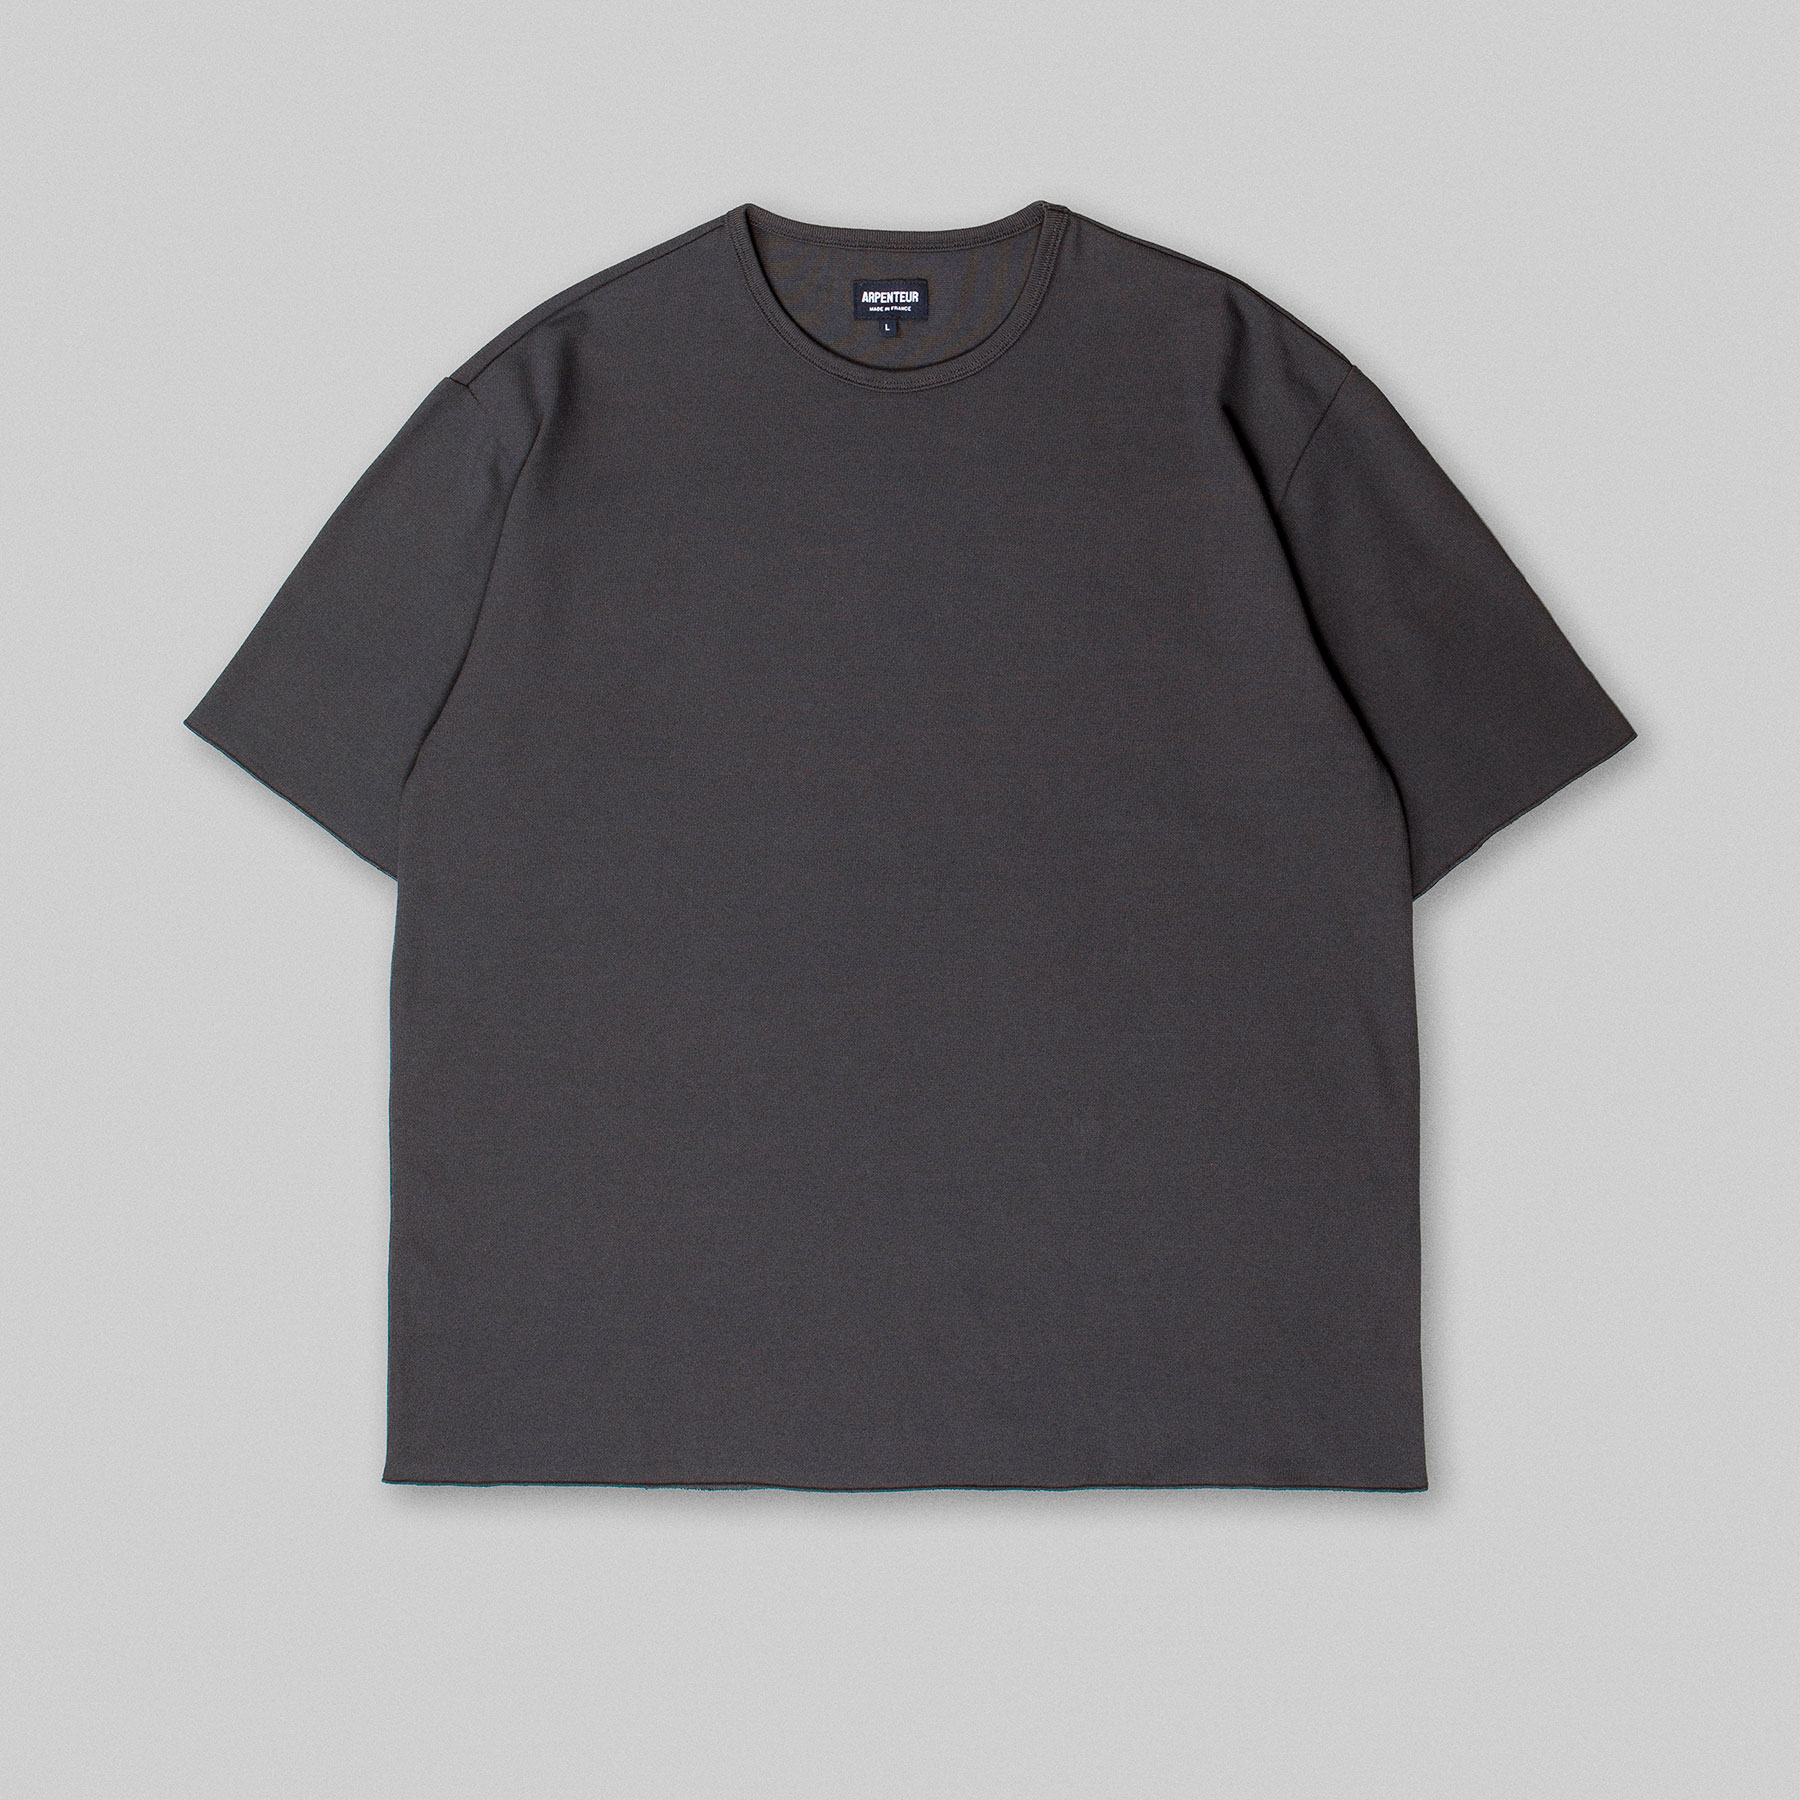 PONTUS t-shirt by Arpenteur in Charcoal color